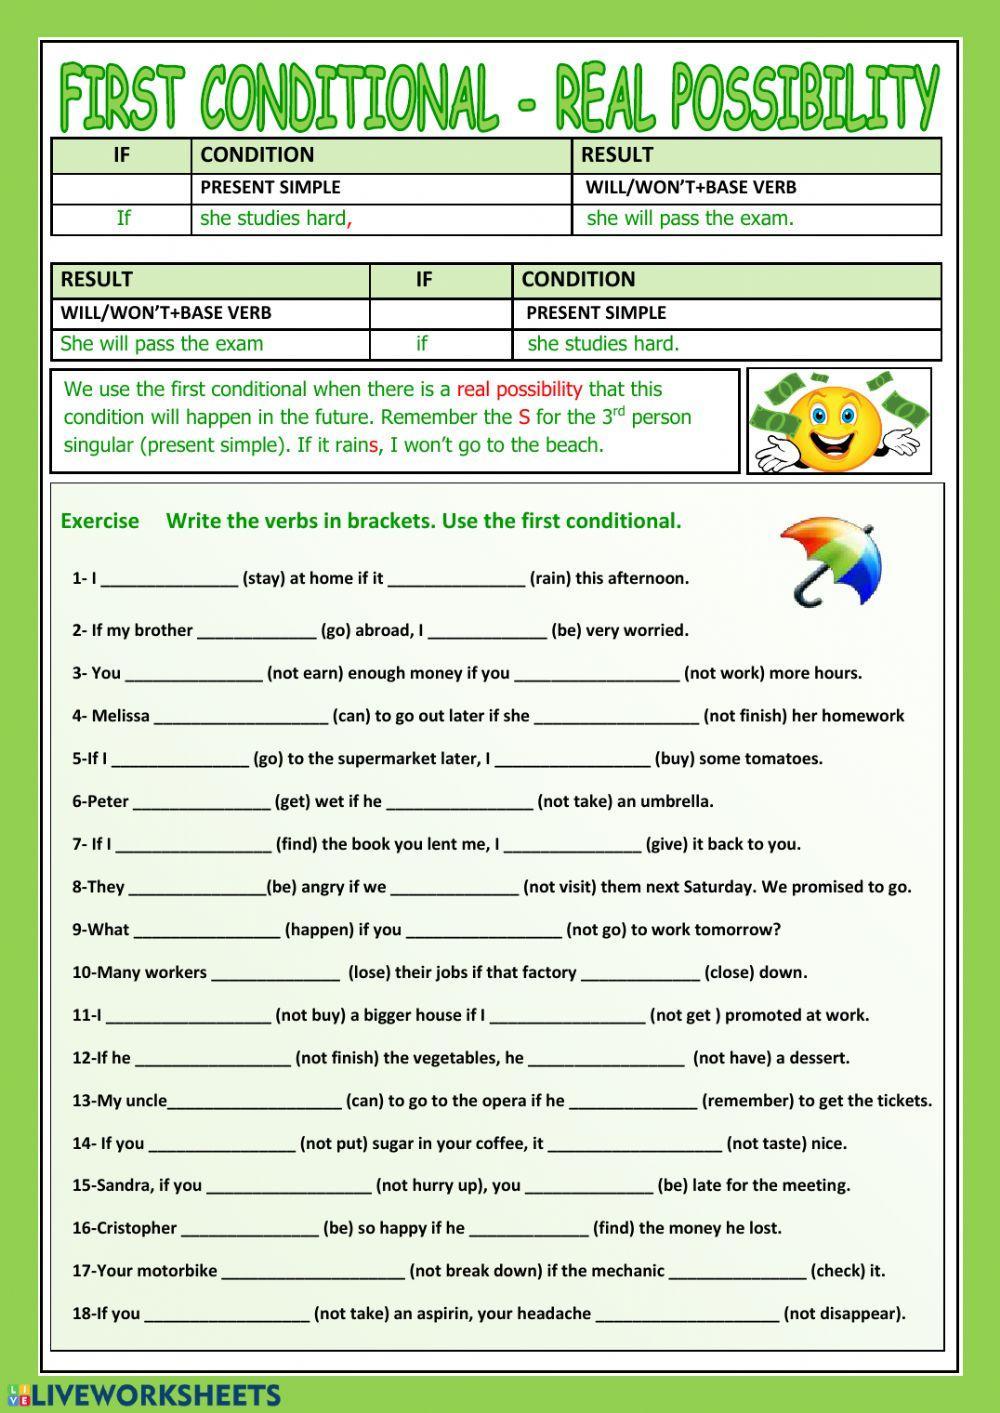 First conditional worksheet | Live Worksheets